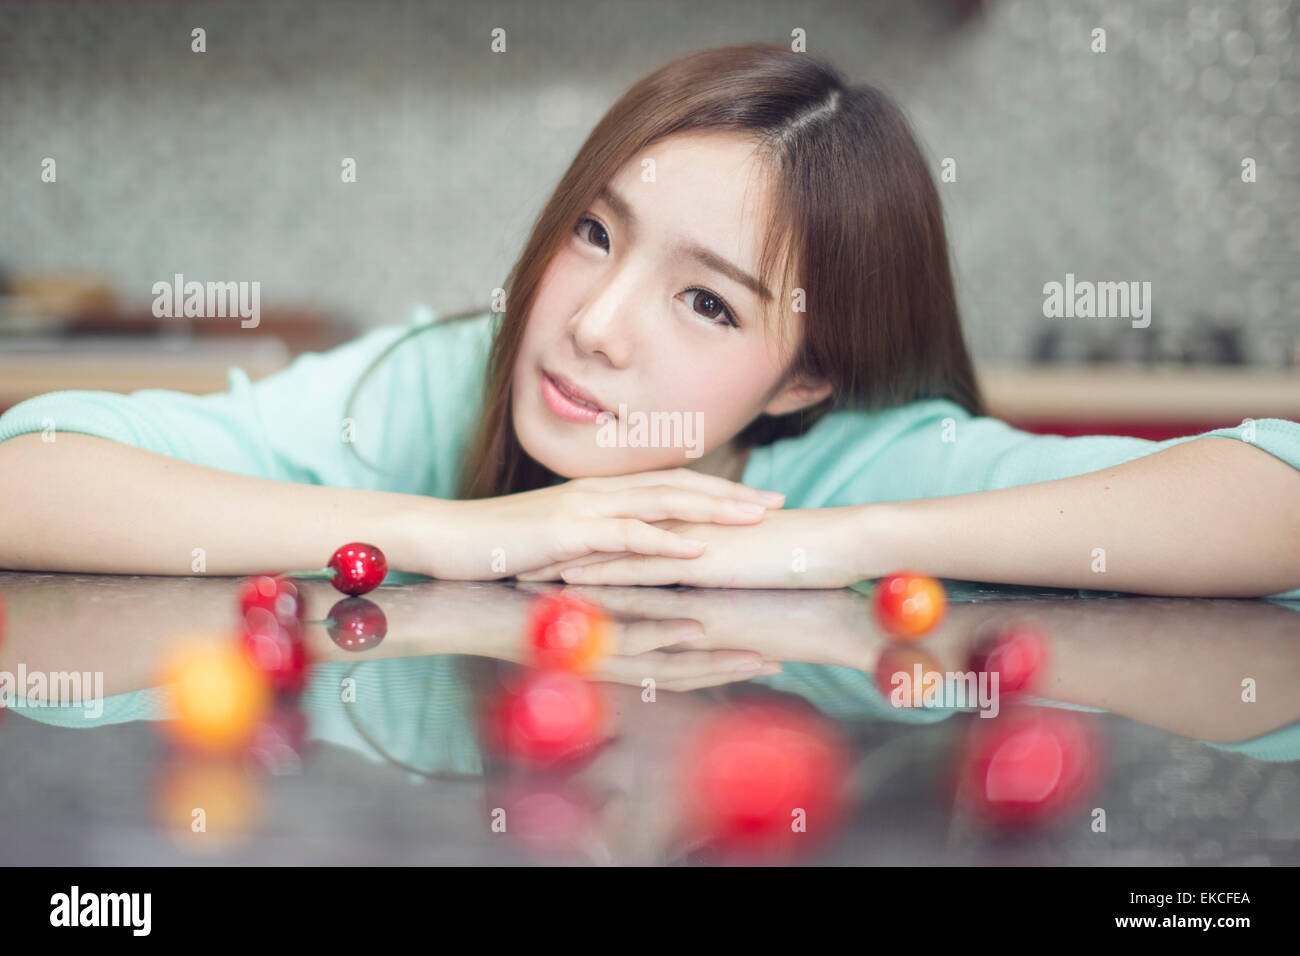 Young women in kitchen with cherries Stock Photo